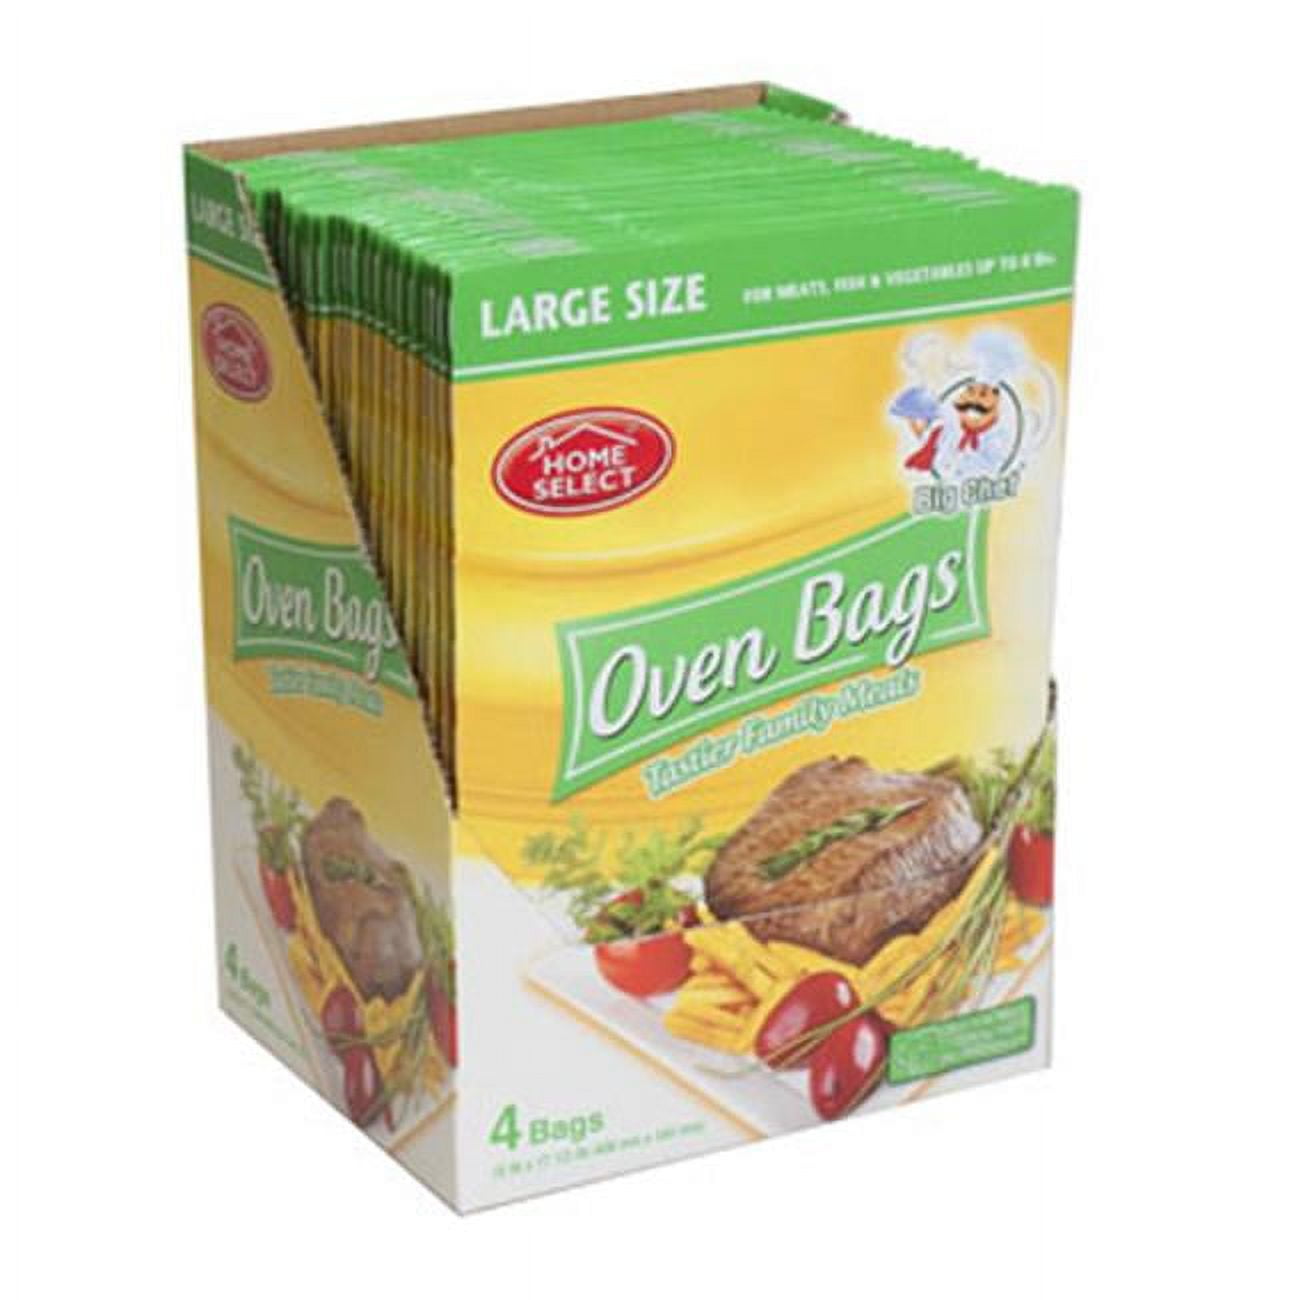 Home Select Large Size Oven Bags Large Size 4 ea 4 ct